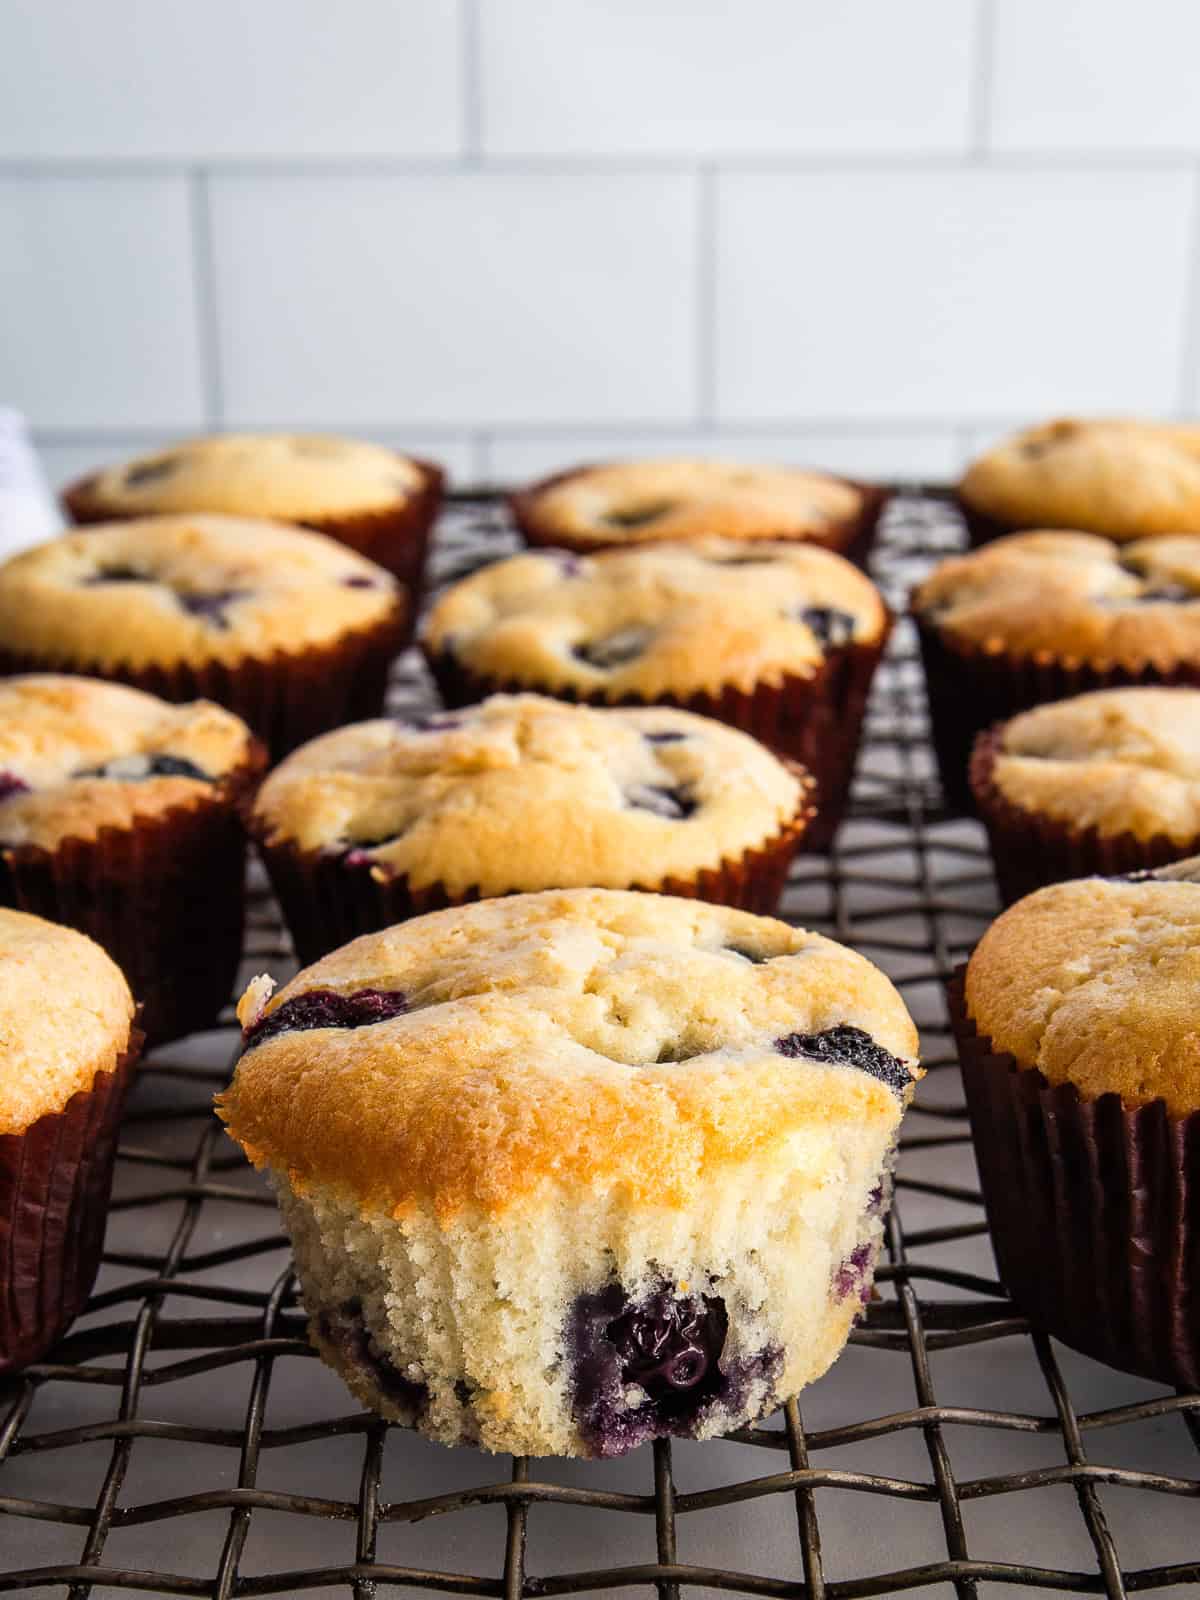 Gluten-free blueberry muffins on a cooling rack. One is unwrapped to show the texture.